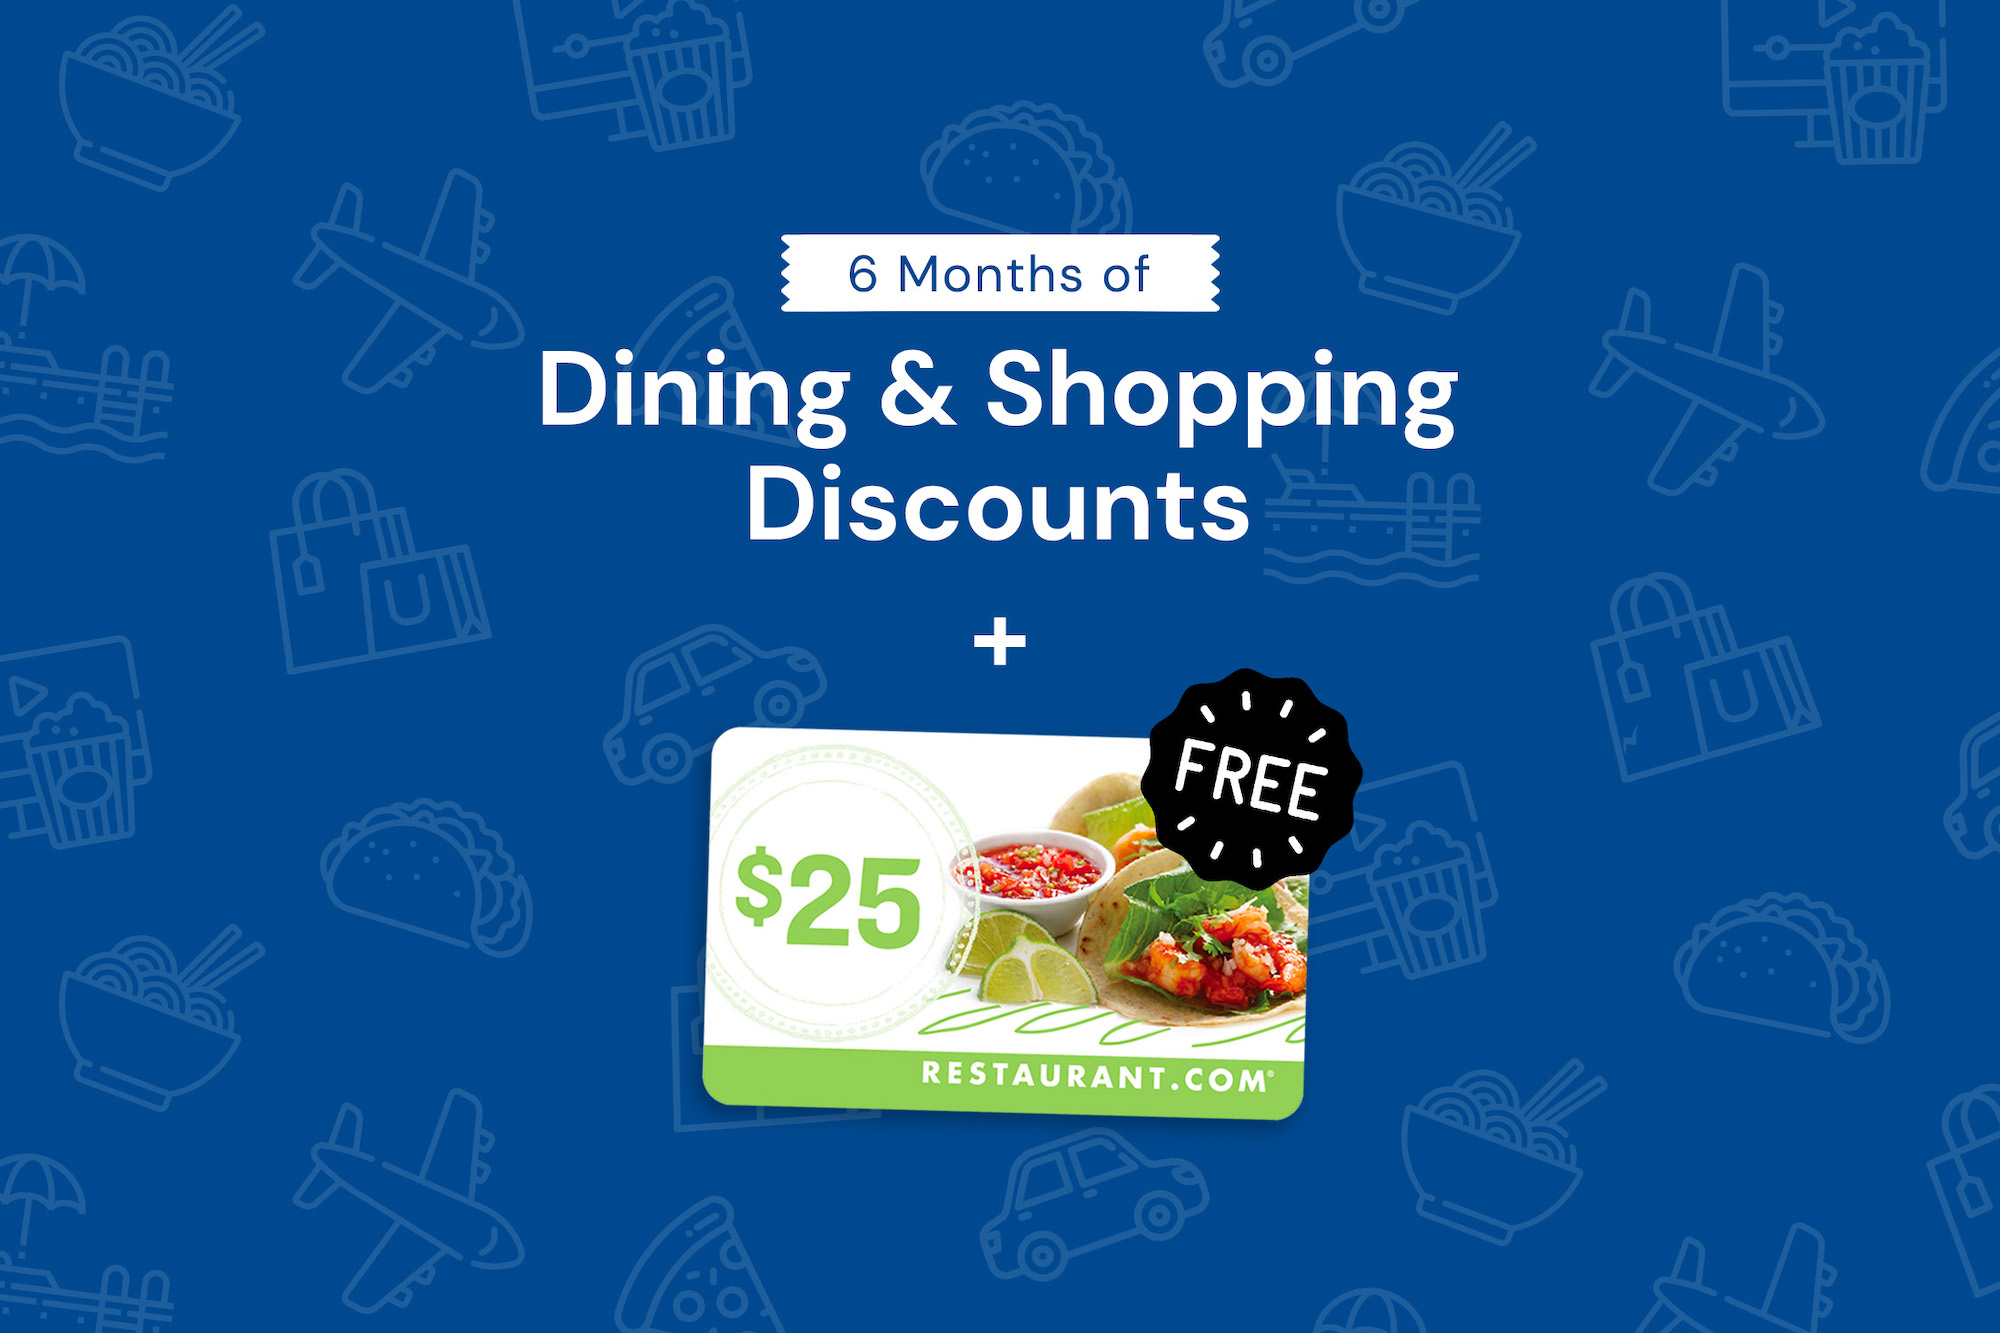 Reduced-price dining deals